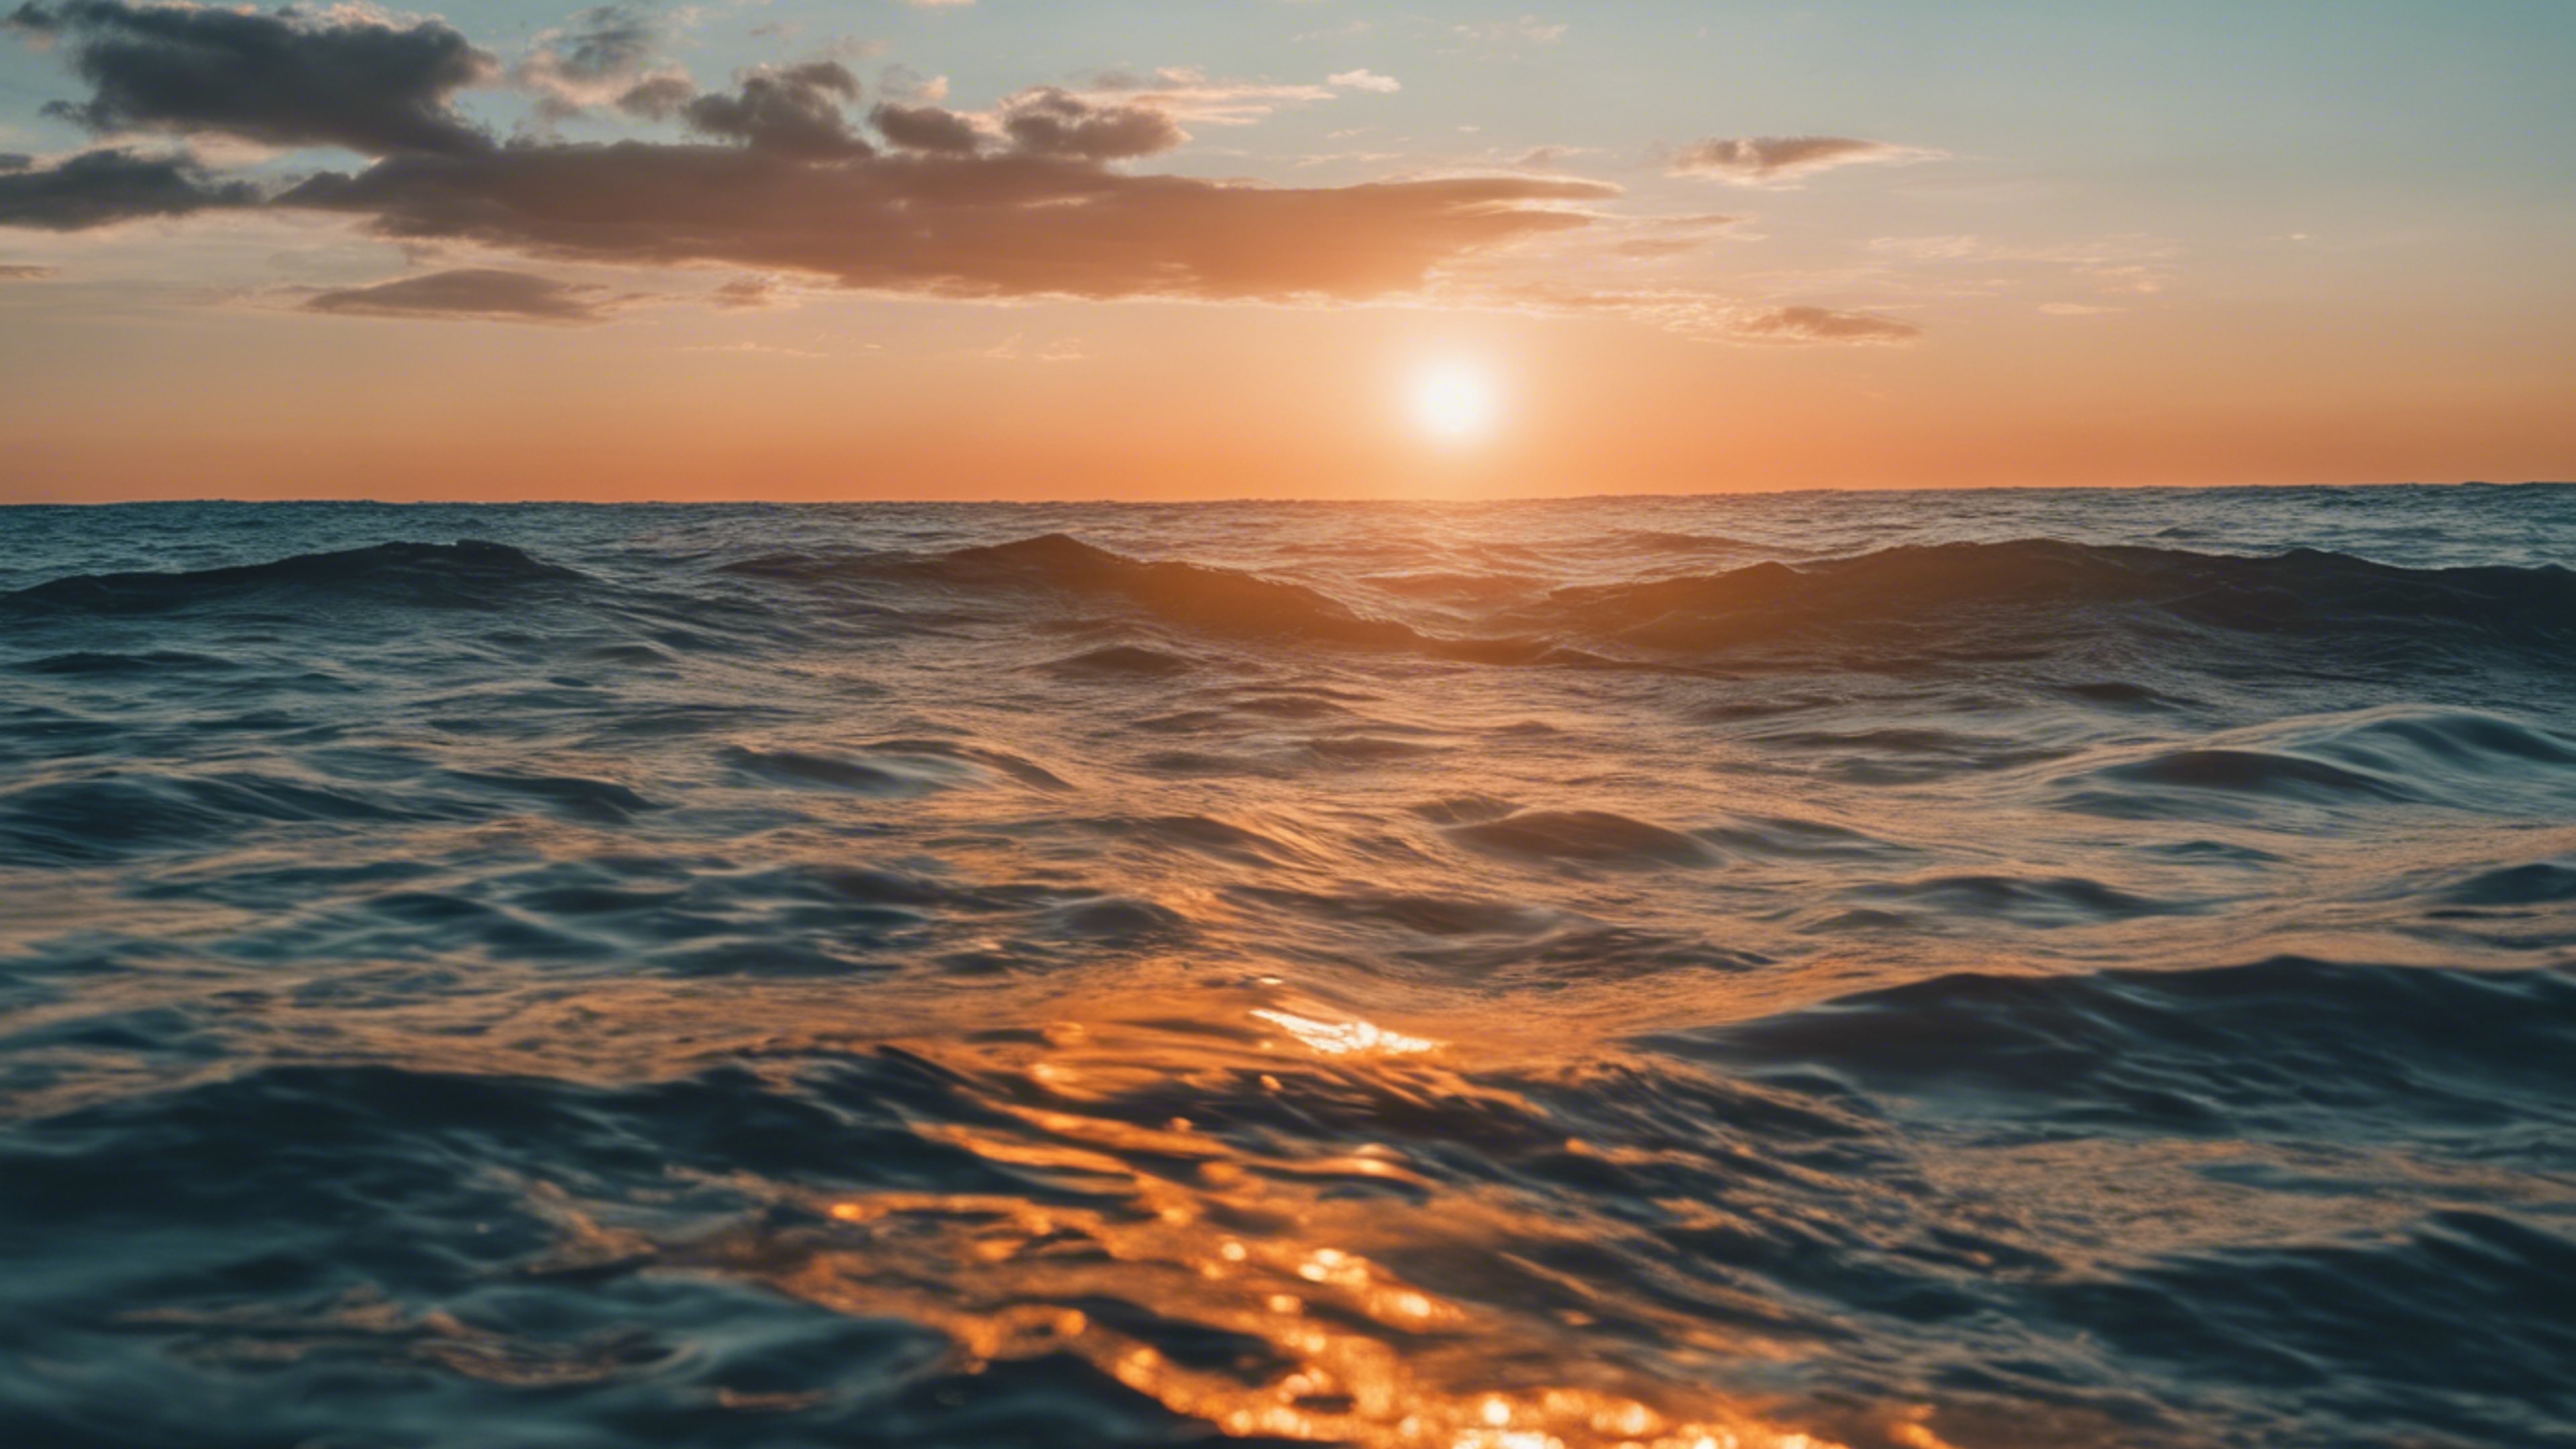 A sunset scene with orange sun setting in the cool blue ocean. Wallpaper[7965154be6e2421b8d94]